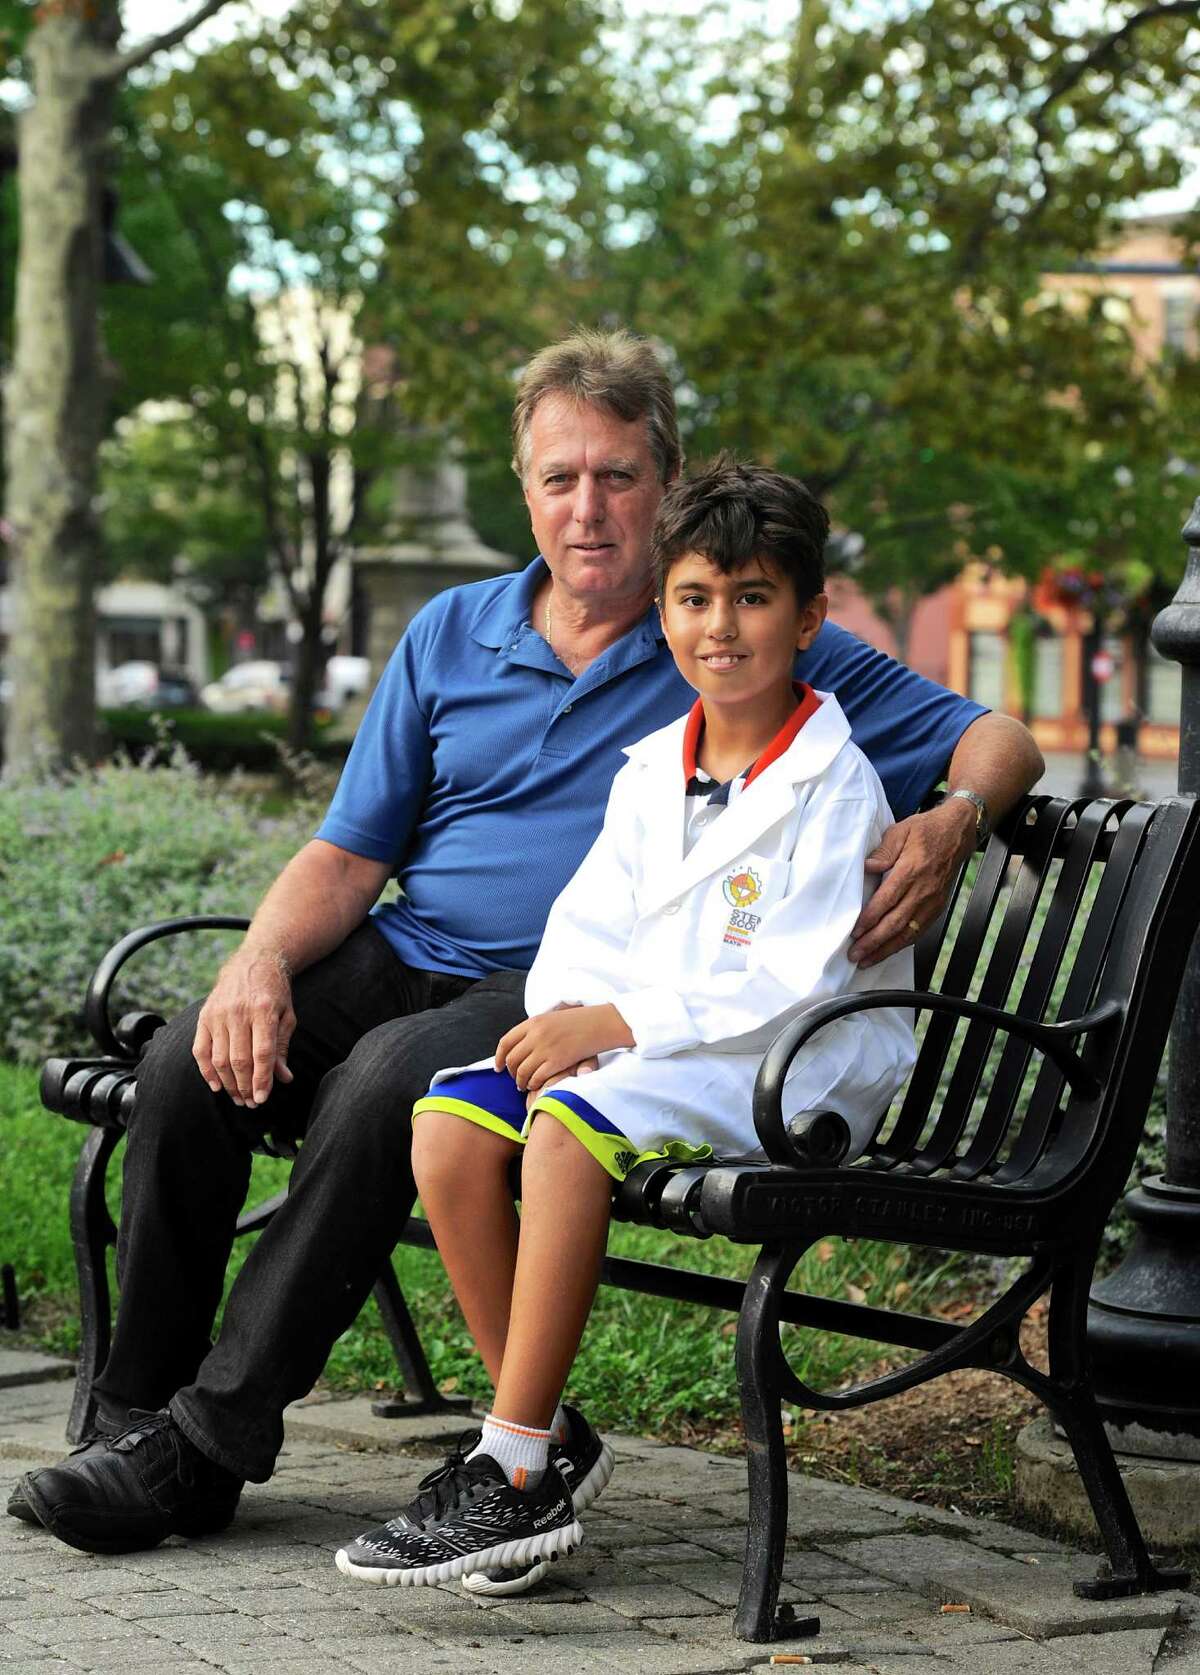 Gary Prybylski Jr, 9, of Danbury, and his father Gary Prybylski Sr sit on a bench in front of the Danbury Public Library on Tuesday afternoon, September 20, 2016, in Danbury, Conn. The library is meeting place of the new STEM Scouts Danbury Library Elementary School Lab #1010, which is part of the Boy Scouts. Prybylski Sr brought the new scouting program to Danbury. The group will be holding a sign-up & demo at the Danbury War memorial on Monday, September 26th, from 5:30 to 6:30 pm.